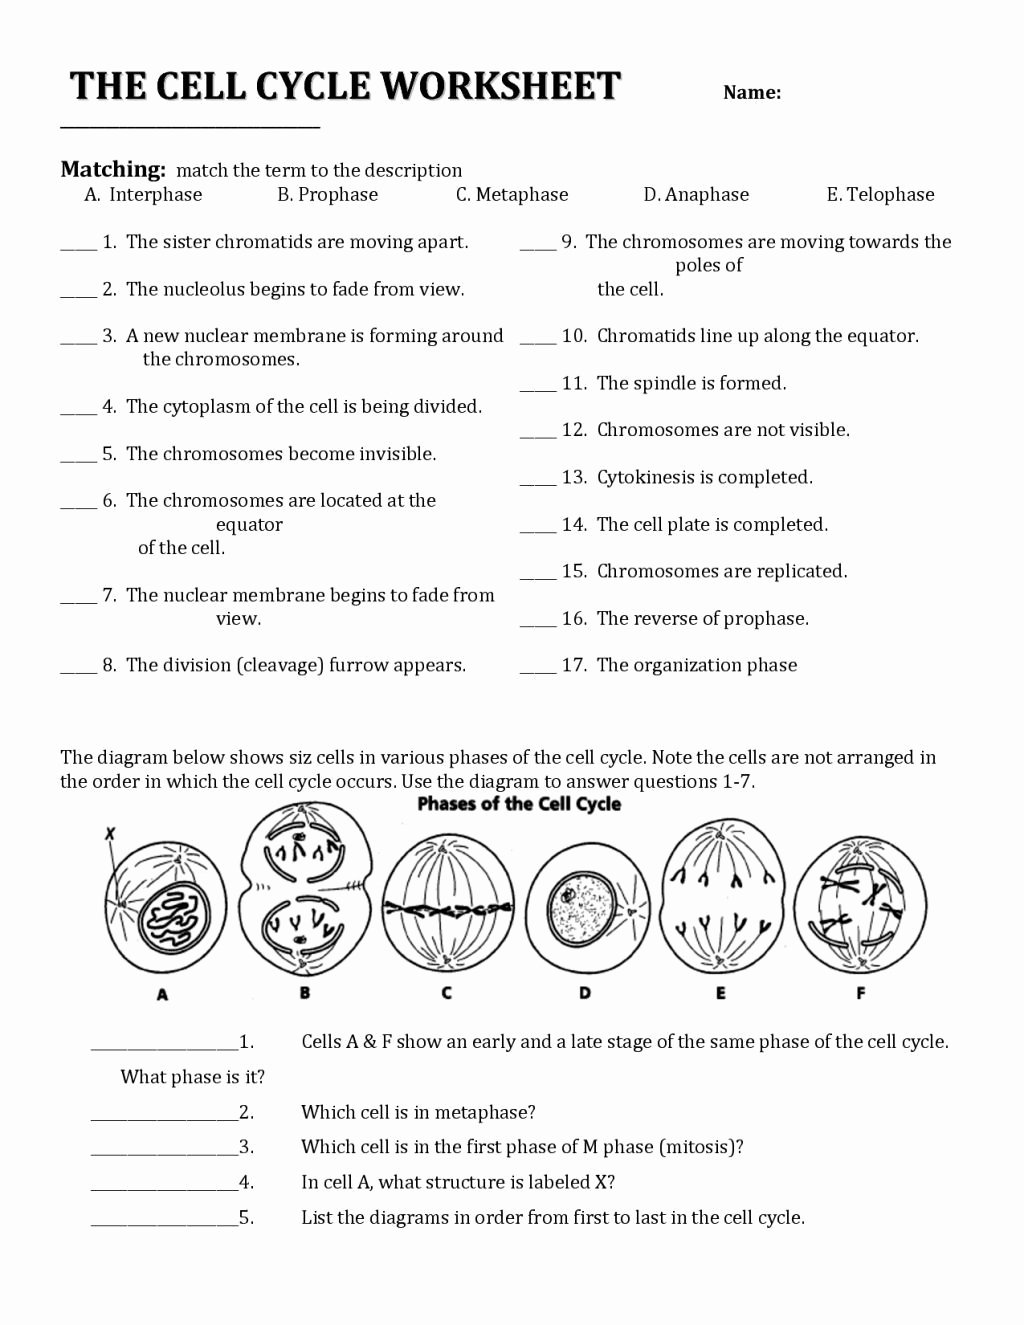 Cell Cycle Coloring Worksheet New Image for the Cell Cycle Coloring Worksheet Key